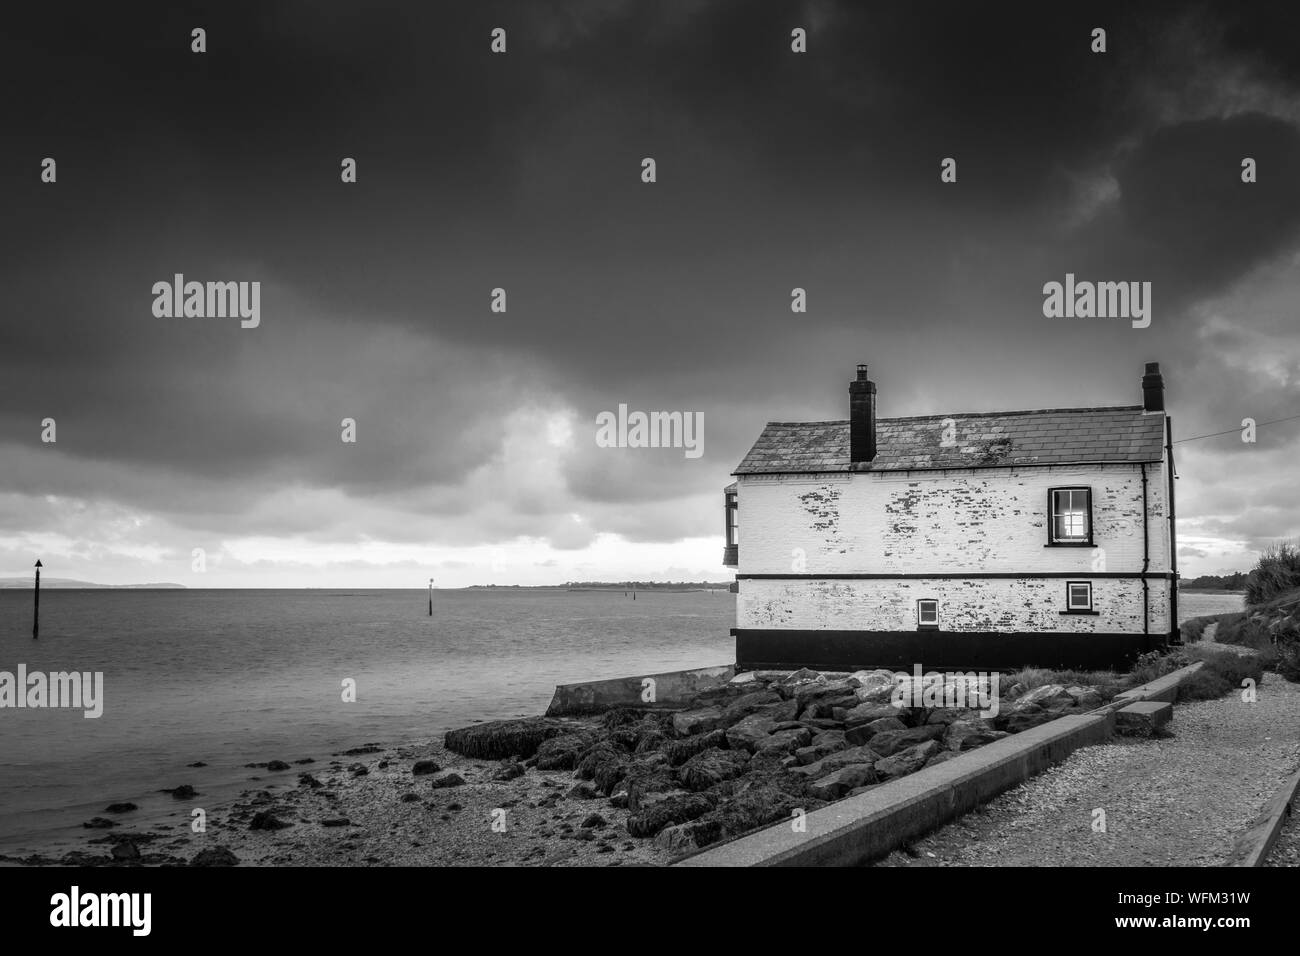 Monochrome of the historic Watch House at Lepe beach along the Solent in Hampshire with dramatic clouds scenery, England, UK Stock Photo